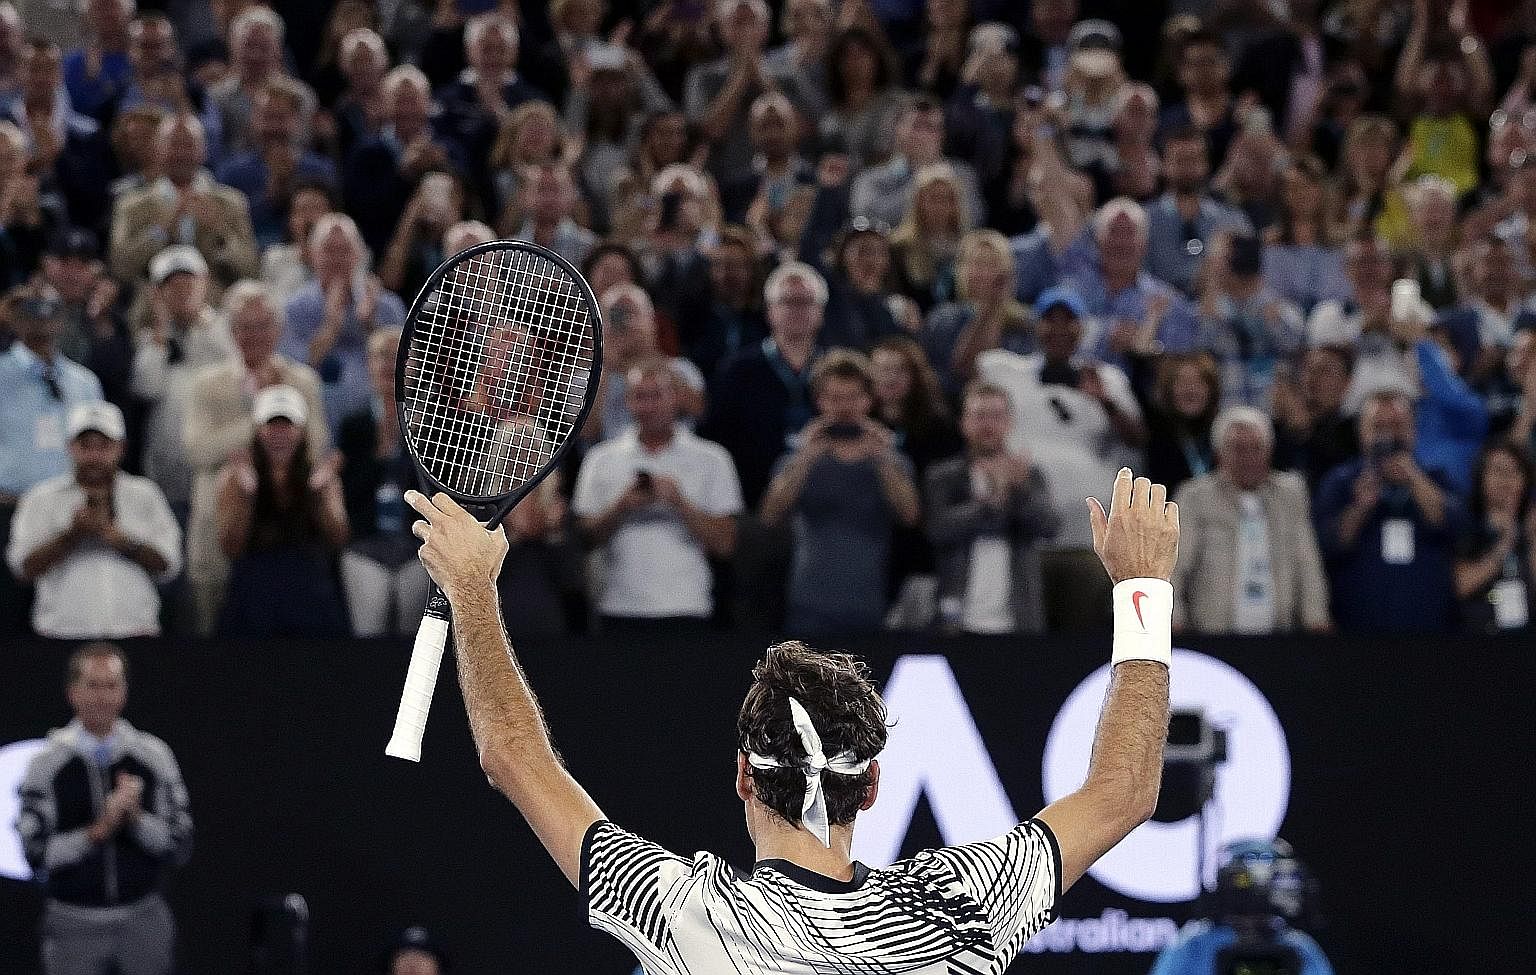 Roger Federer, taking in the Melbourne crowd's adulation after his semi-final win, has reached his 28th Grand Slam final, 14 years after his first one, with his five-set victory over fellow Swiss Stan Wawrinka.